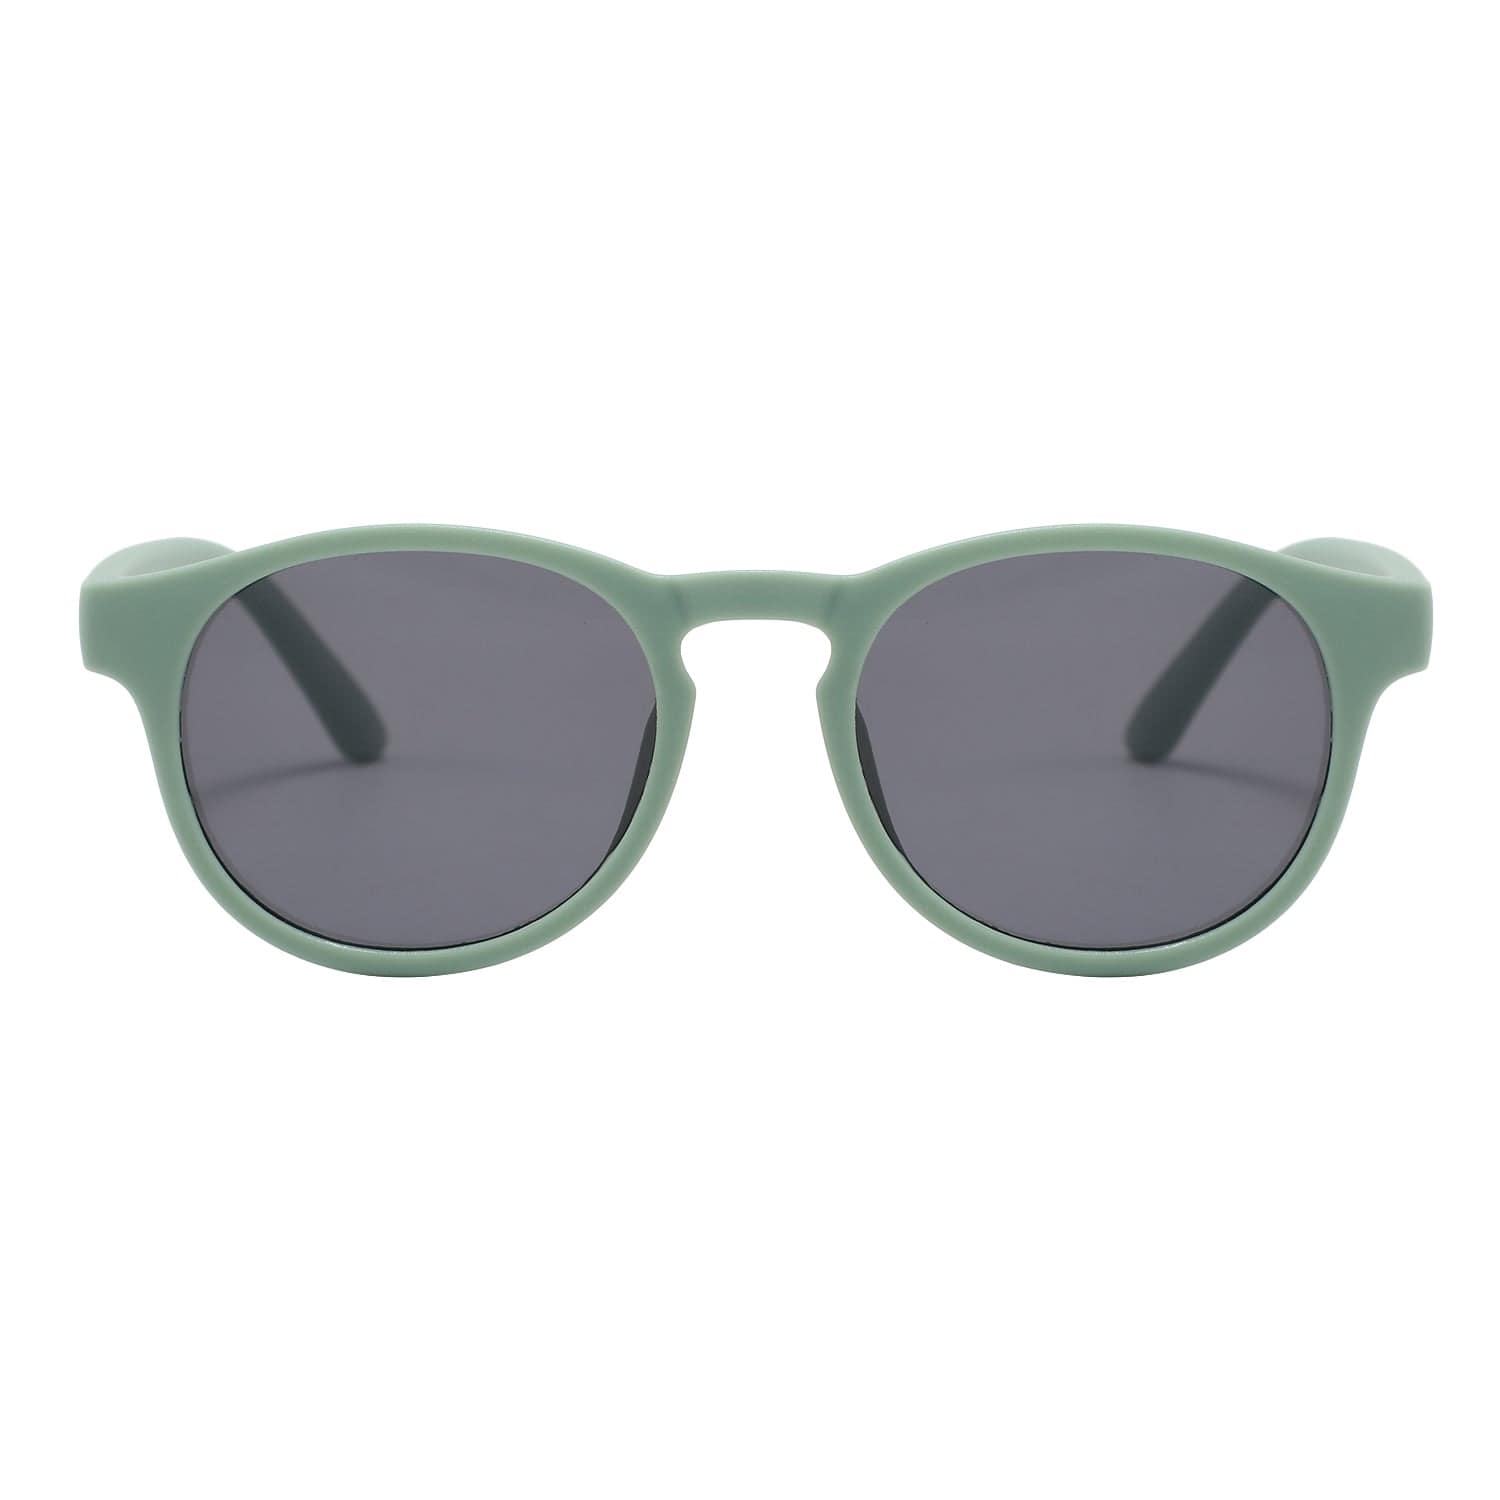 Current Tyed Accessory Sunglasses Matte Mint Keyhole Sunnies